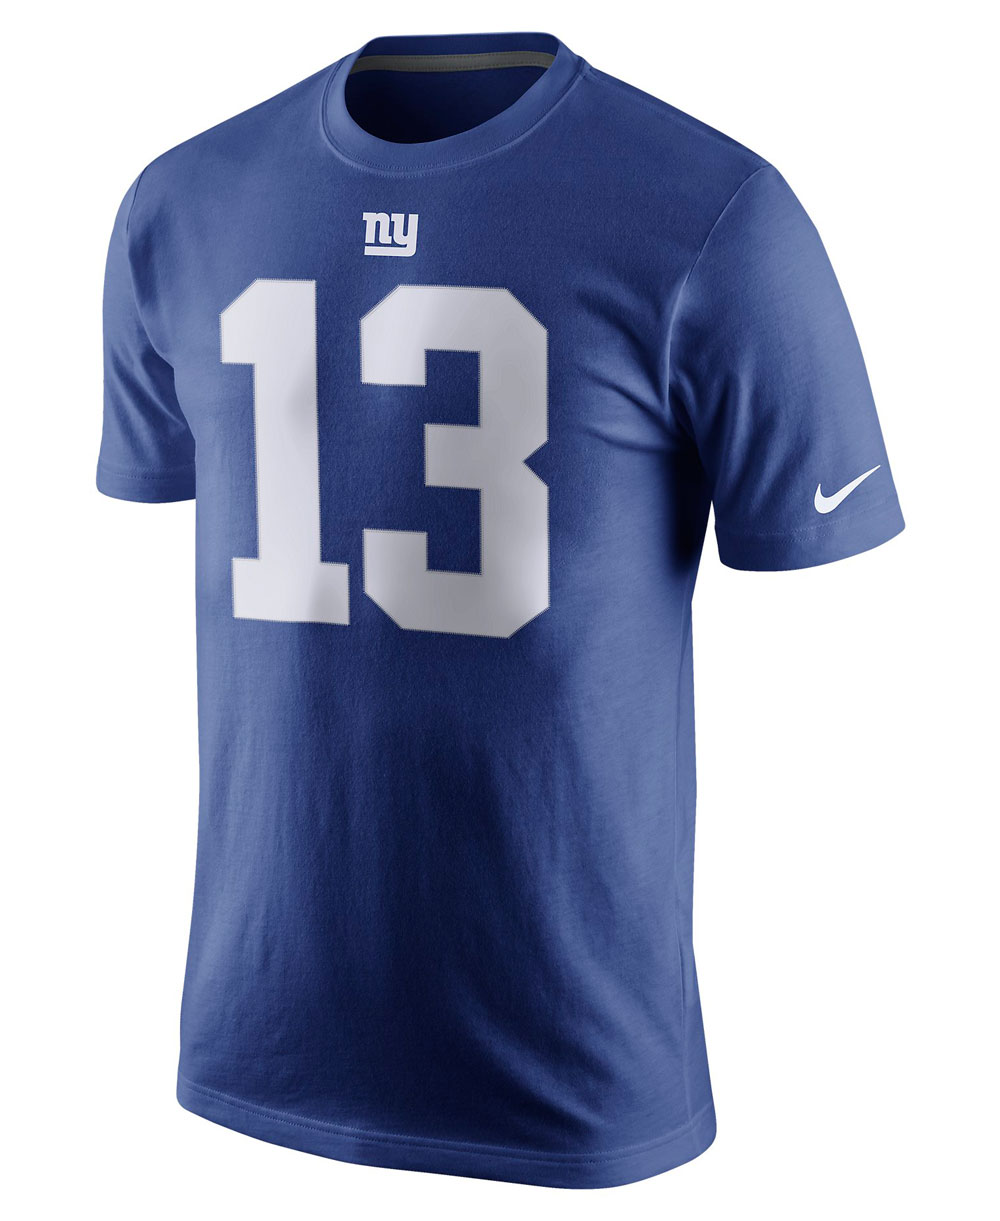 Nike Men's T-Shirt Player Pride Name and Number NFL Giants / Odell